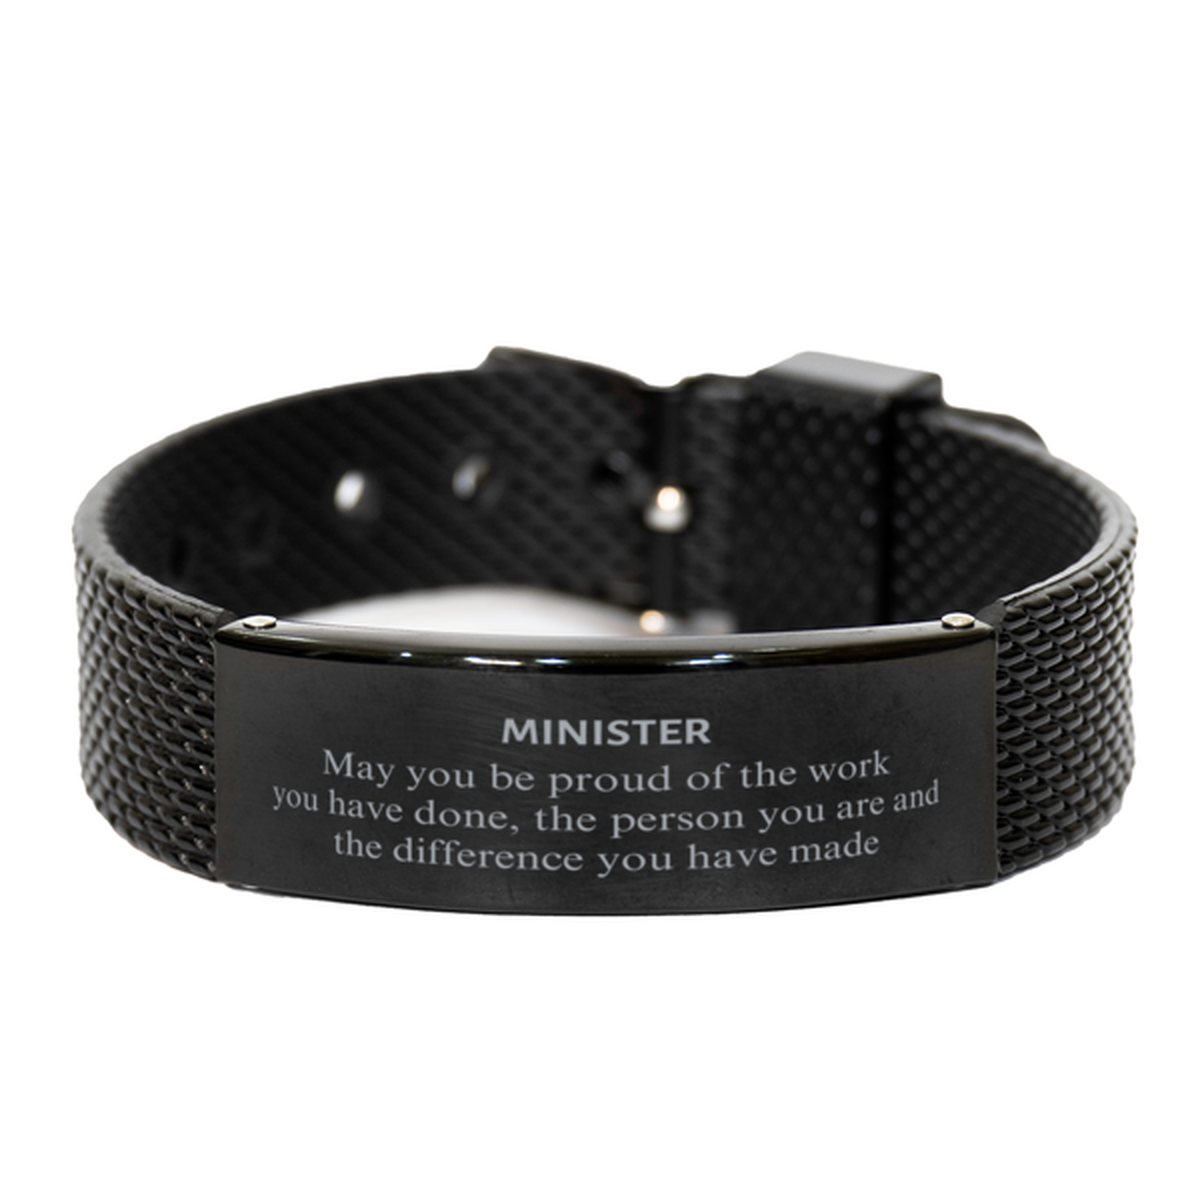 Minister May you be proud of the work you have done, Retirement Minister Black Shark Mesh Bracelet for Colleague Appreciation Gifts Amazing for Minister